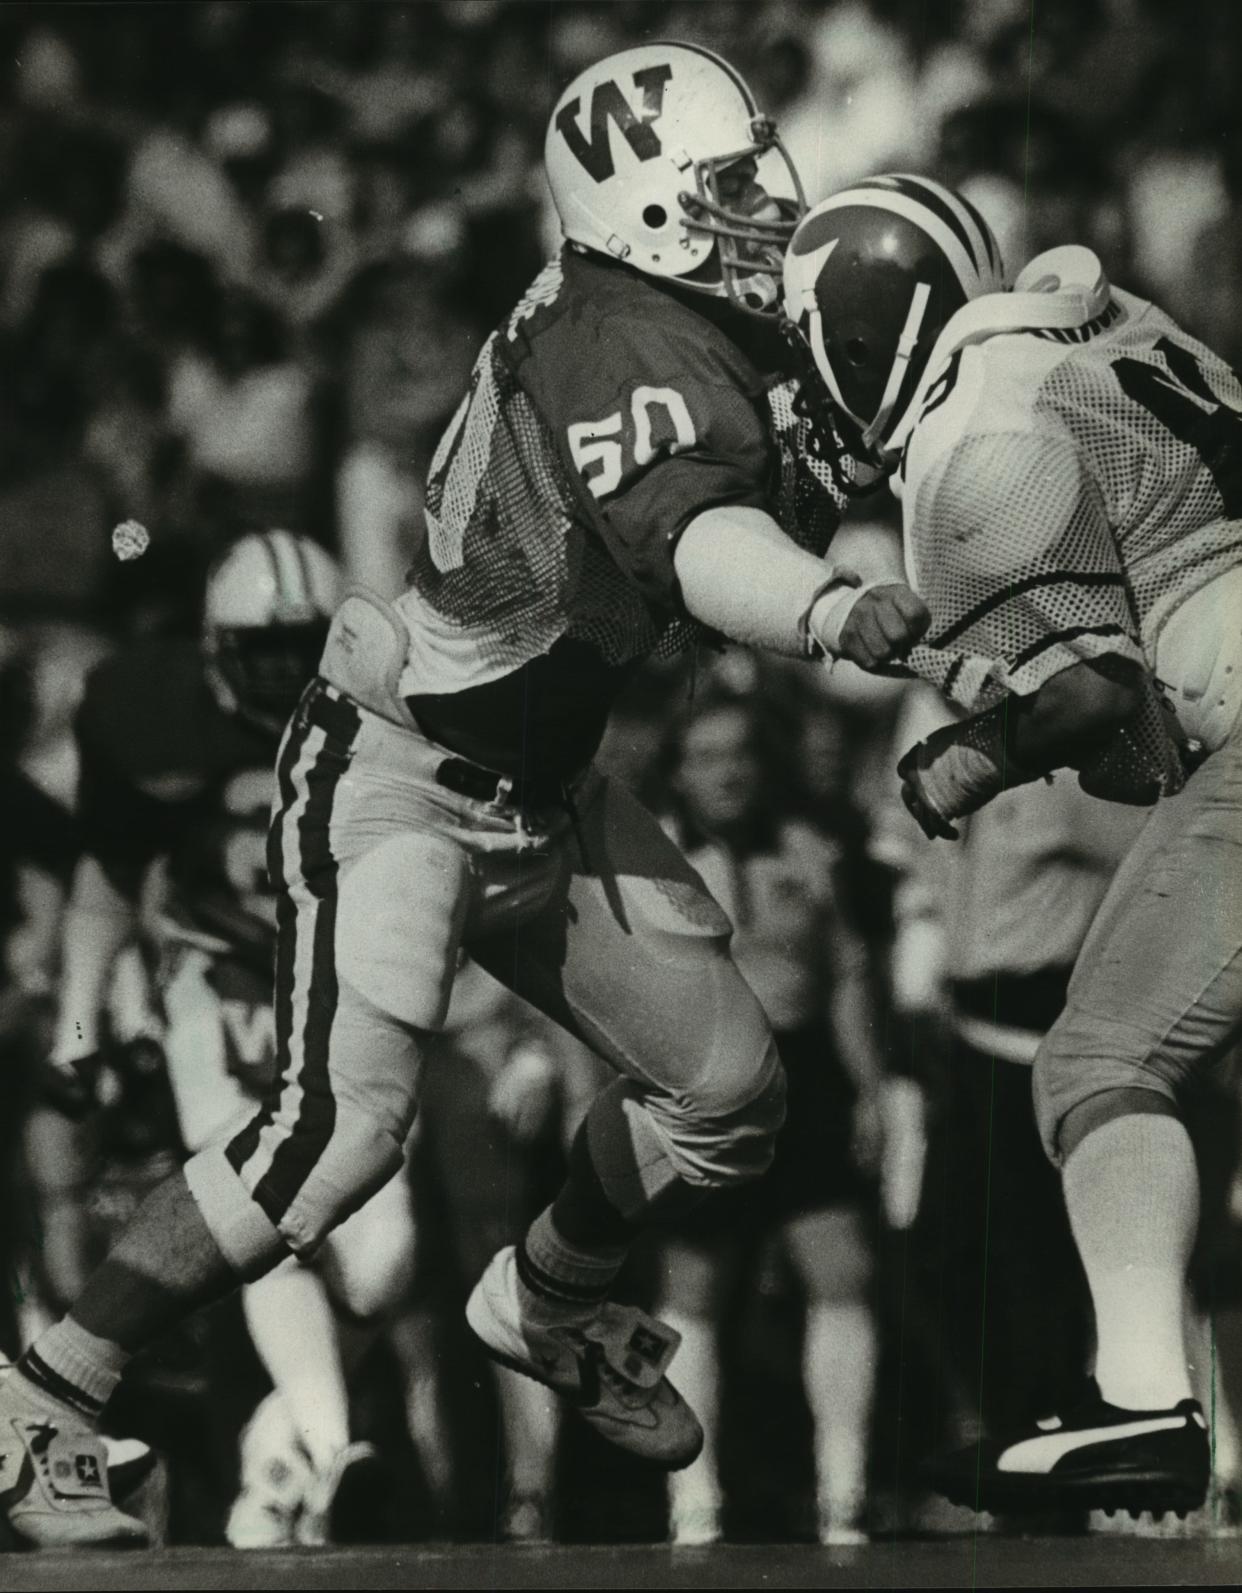 Tim Krumrie squared off against a Michigan lineman in the Badgers' opener at Camp Randall stadium in 1981. Krumrie was named the national lineman of the week for his performance.